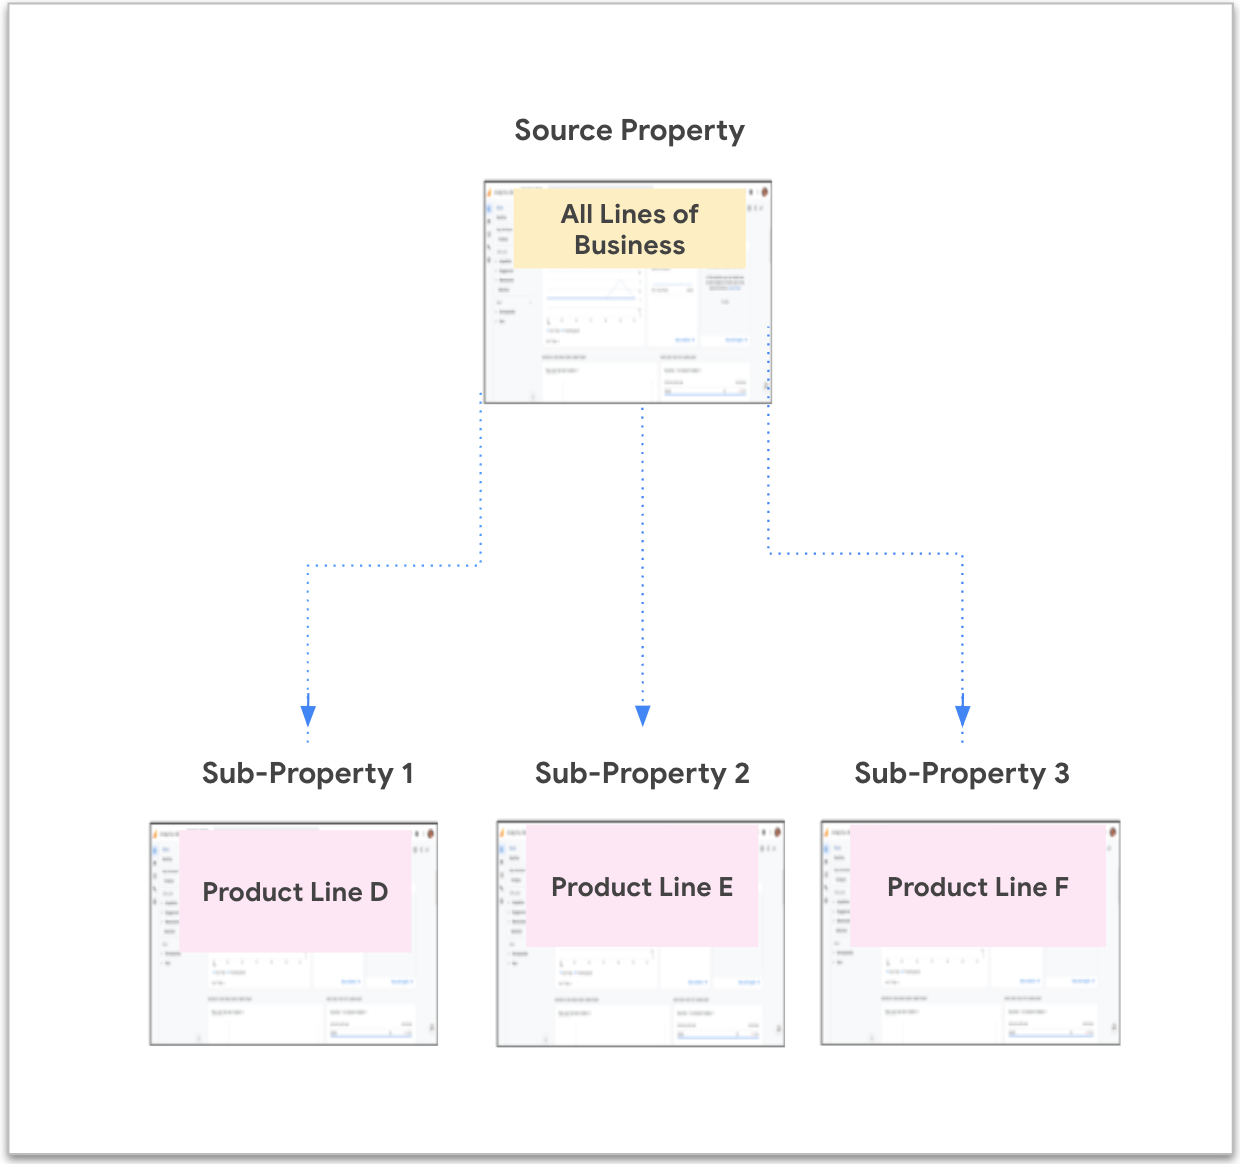 Diagram of a source property with 3 sub-properties